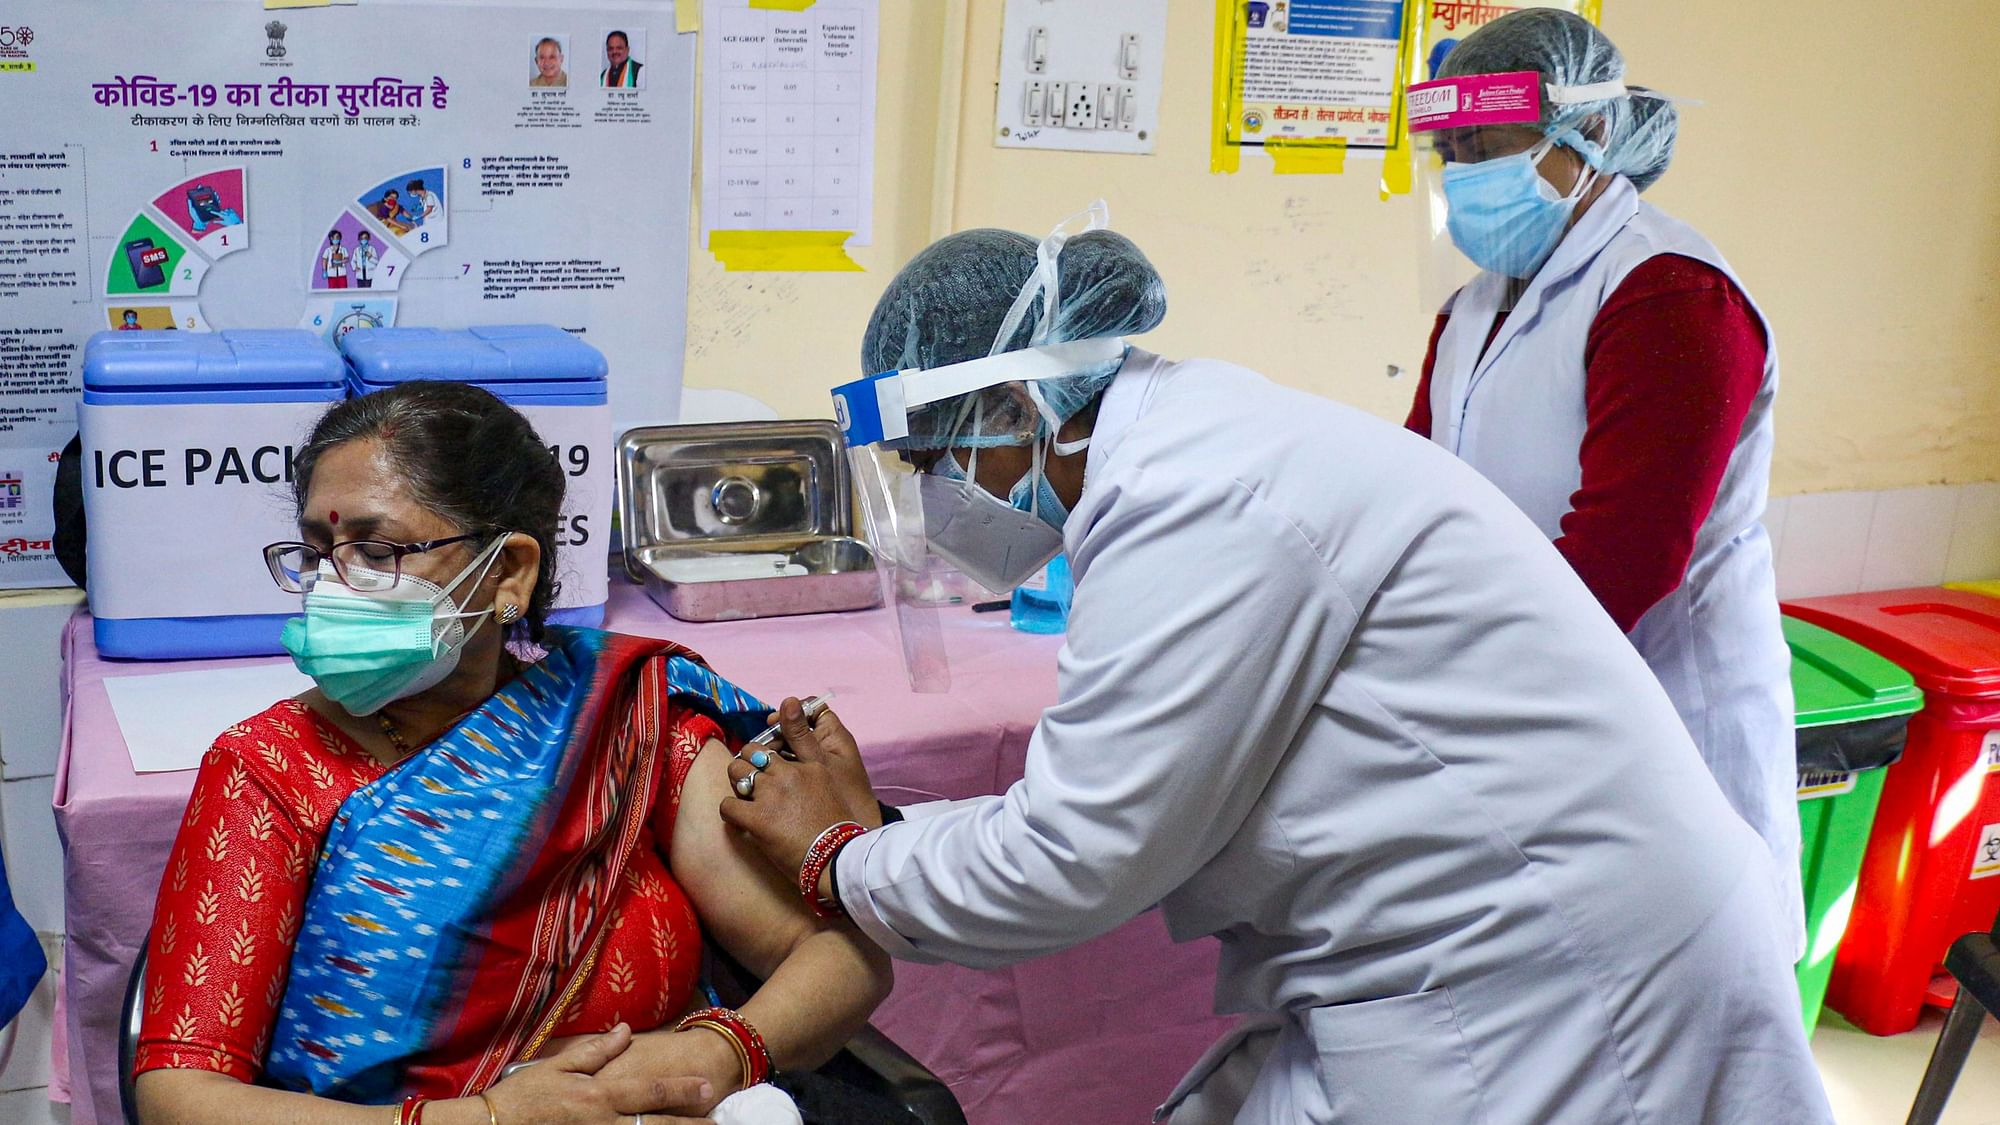 India has carried out more than 85.16 lakh vaccinations against COVID-19 so far, with the second dose also being given to beneficiaries after a gap of 28 days.